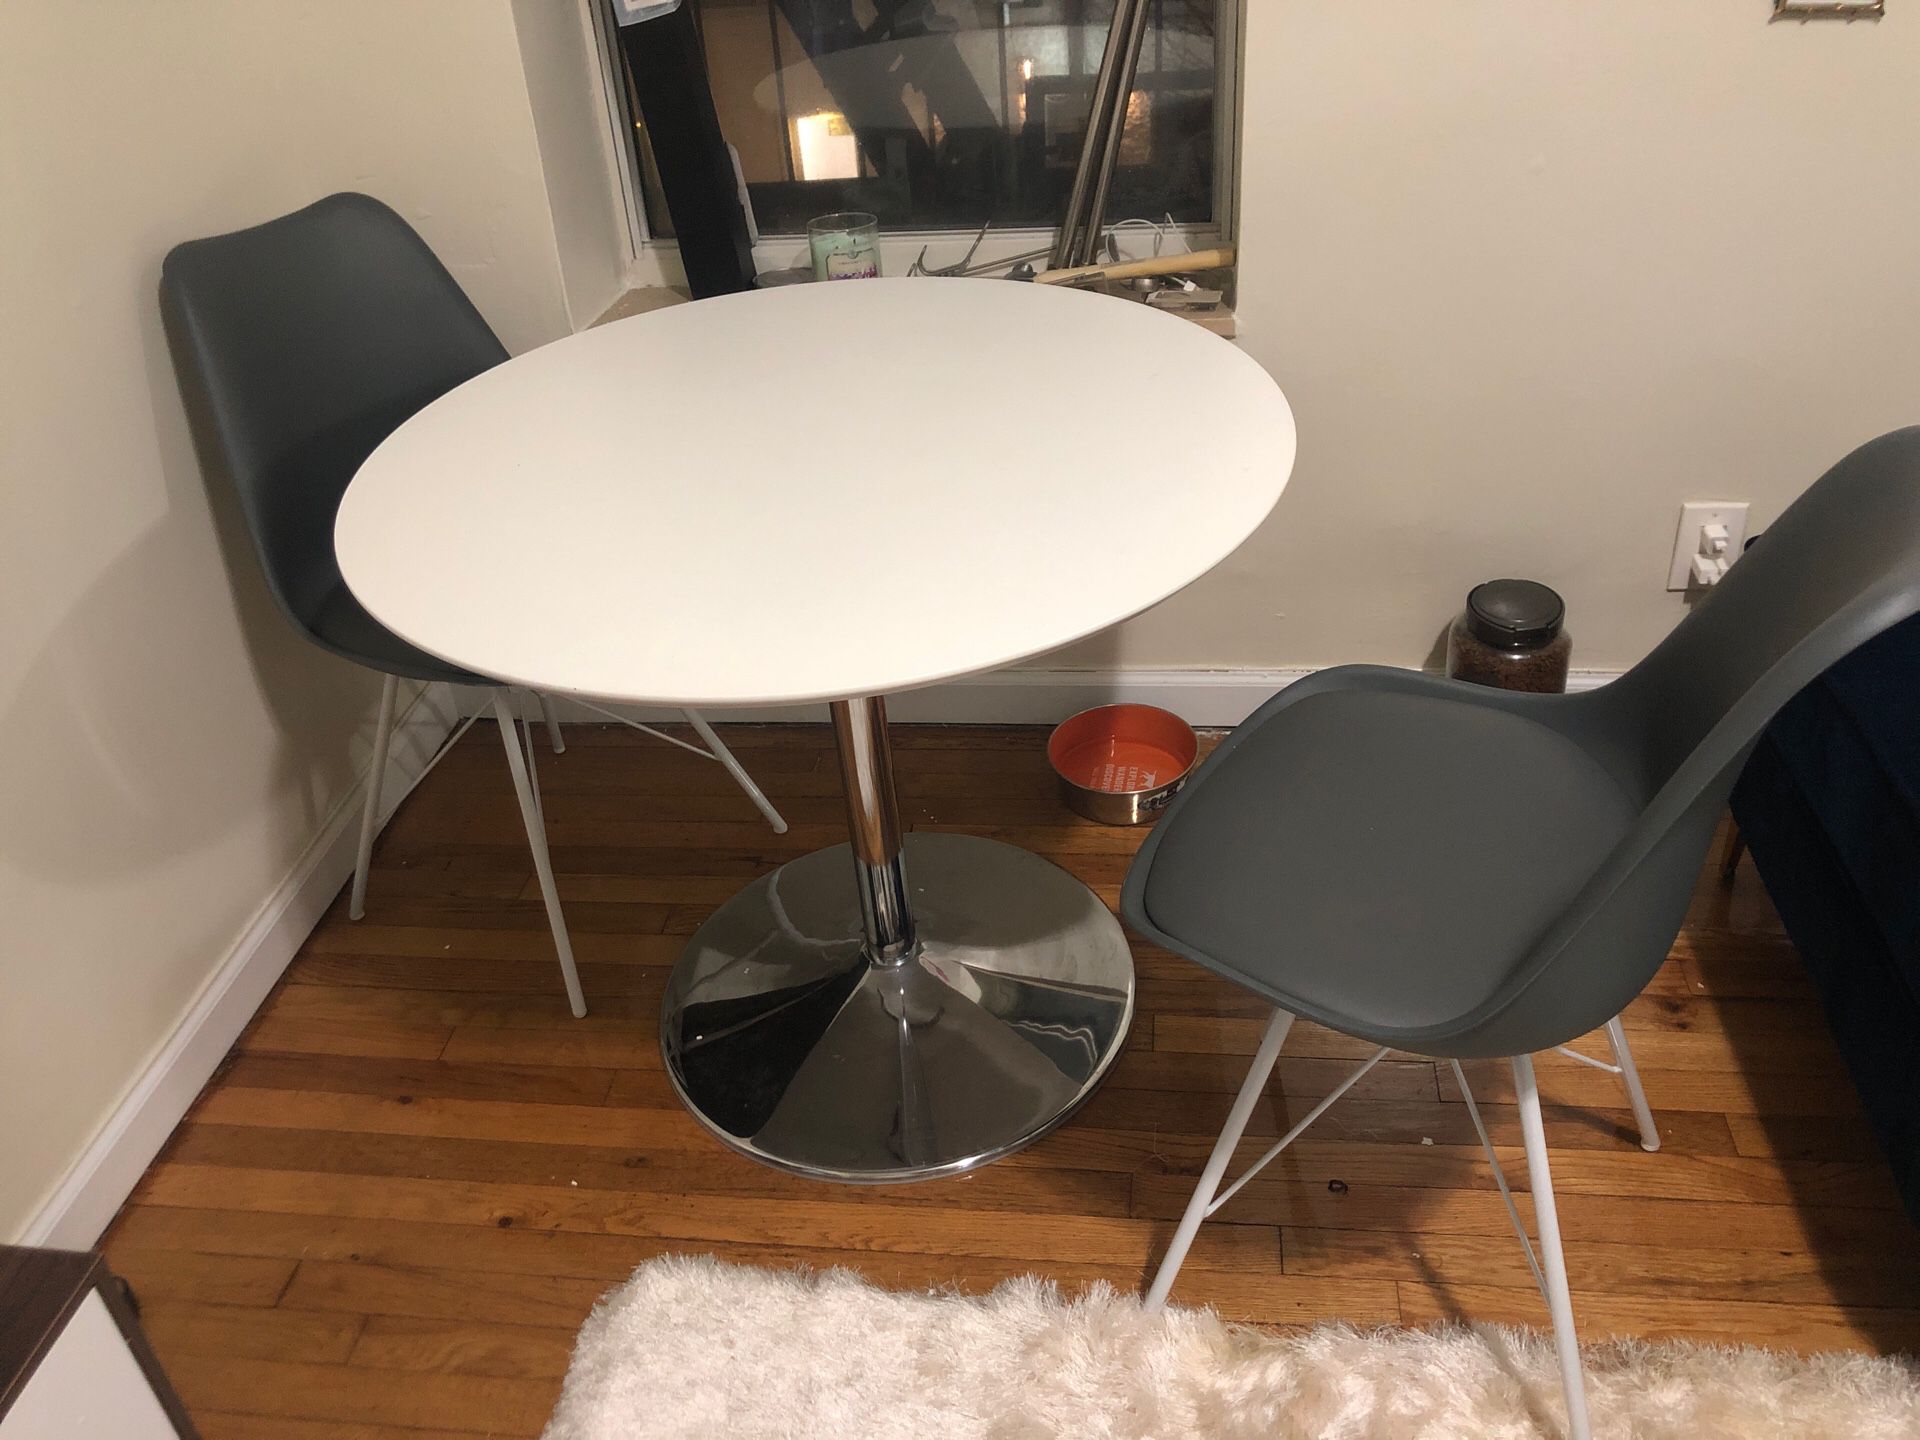 Table + chair set